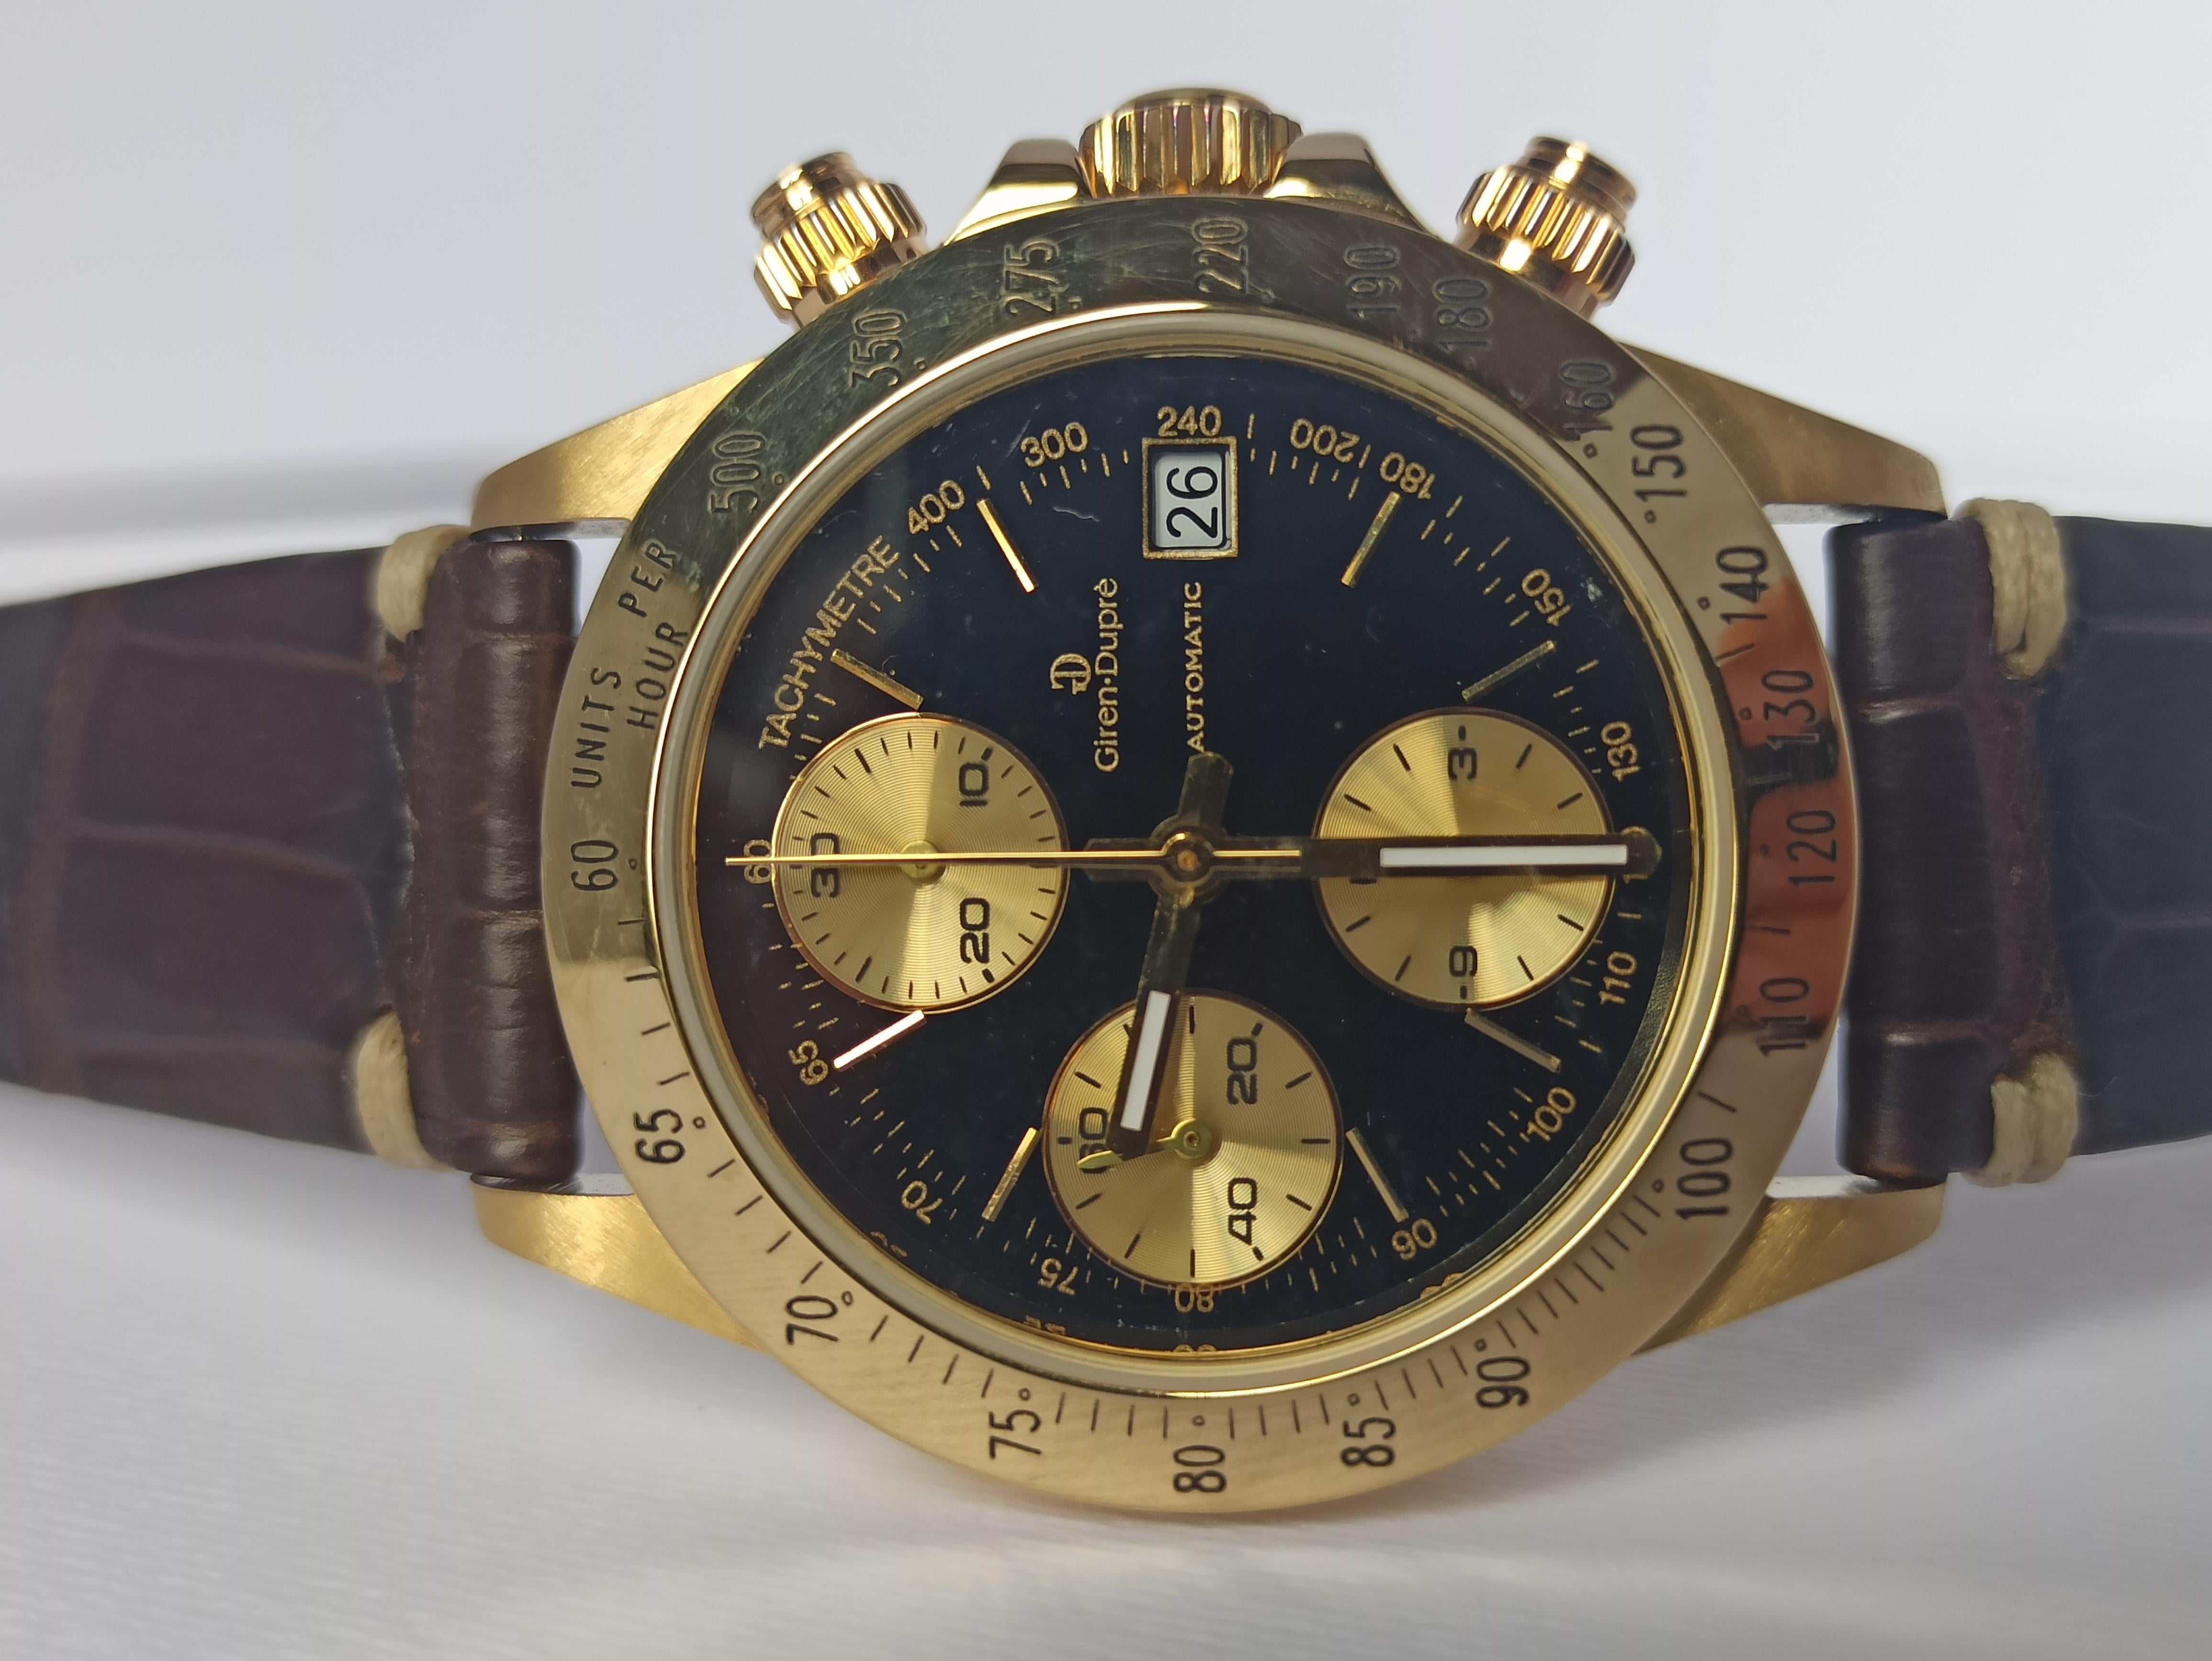 Giren Dupre' 18kt Solid Gold Daytona Style Chronograph, Leather Strap, Automatic For Sale 2